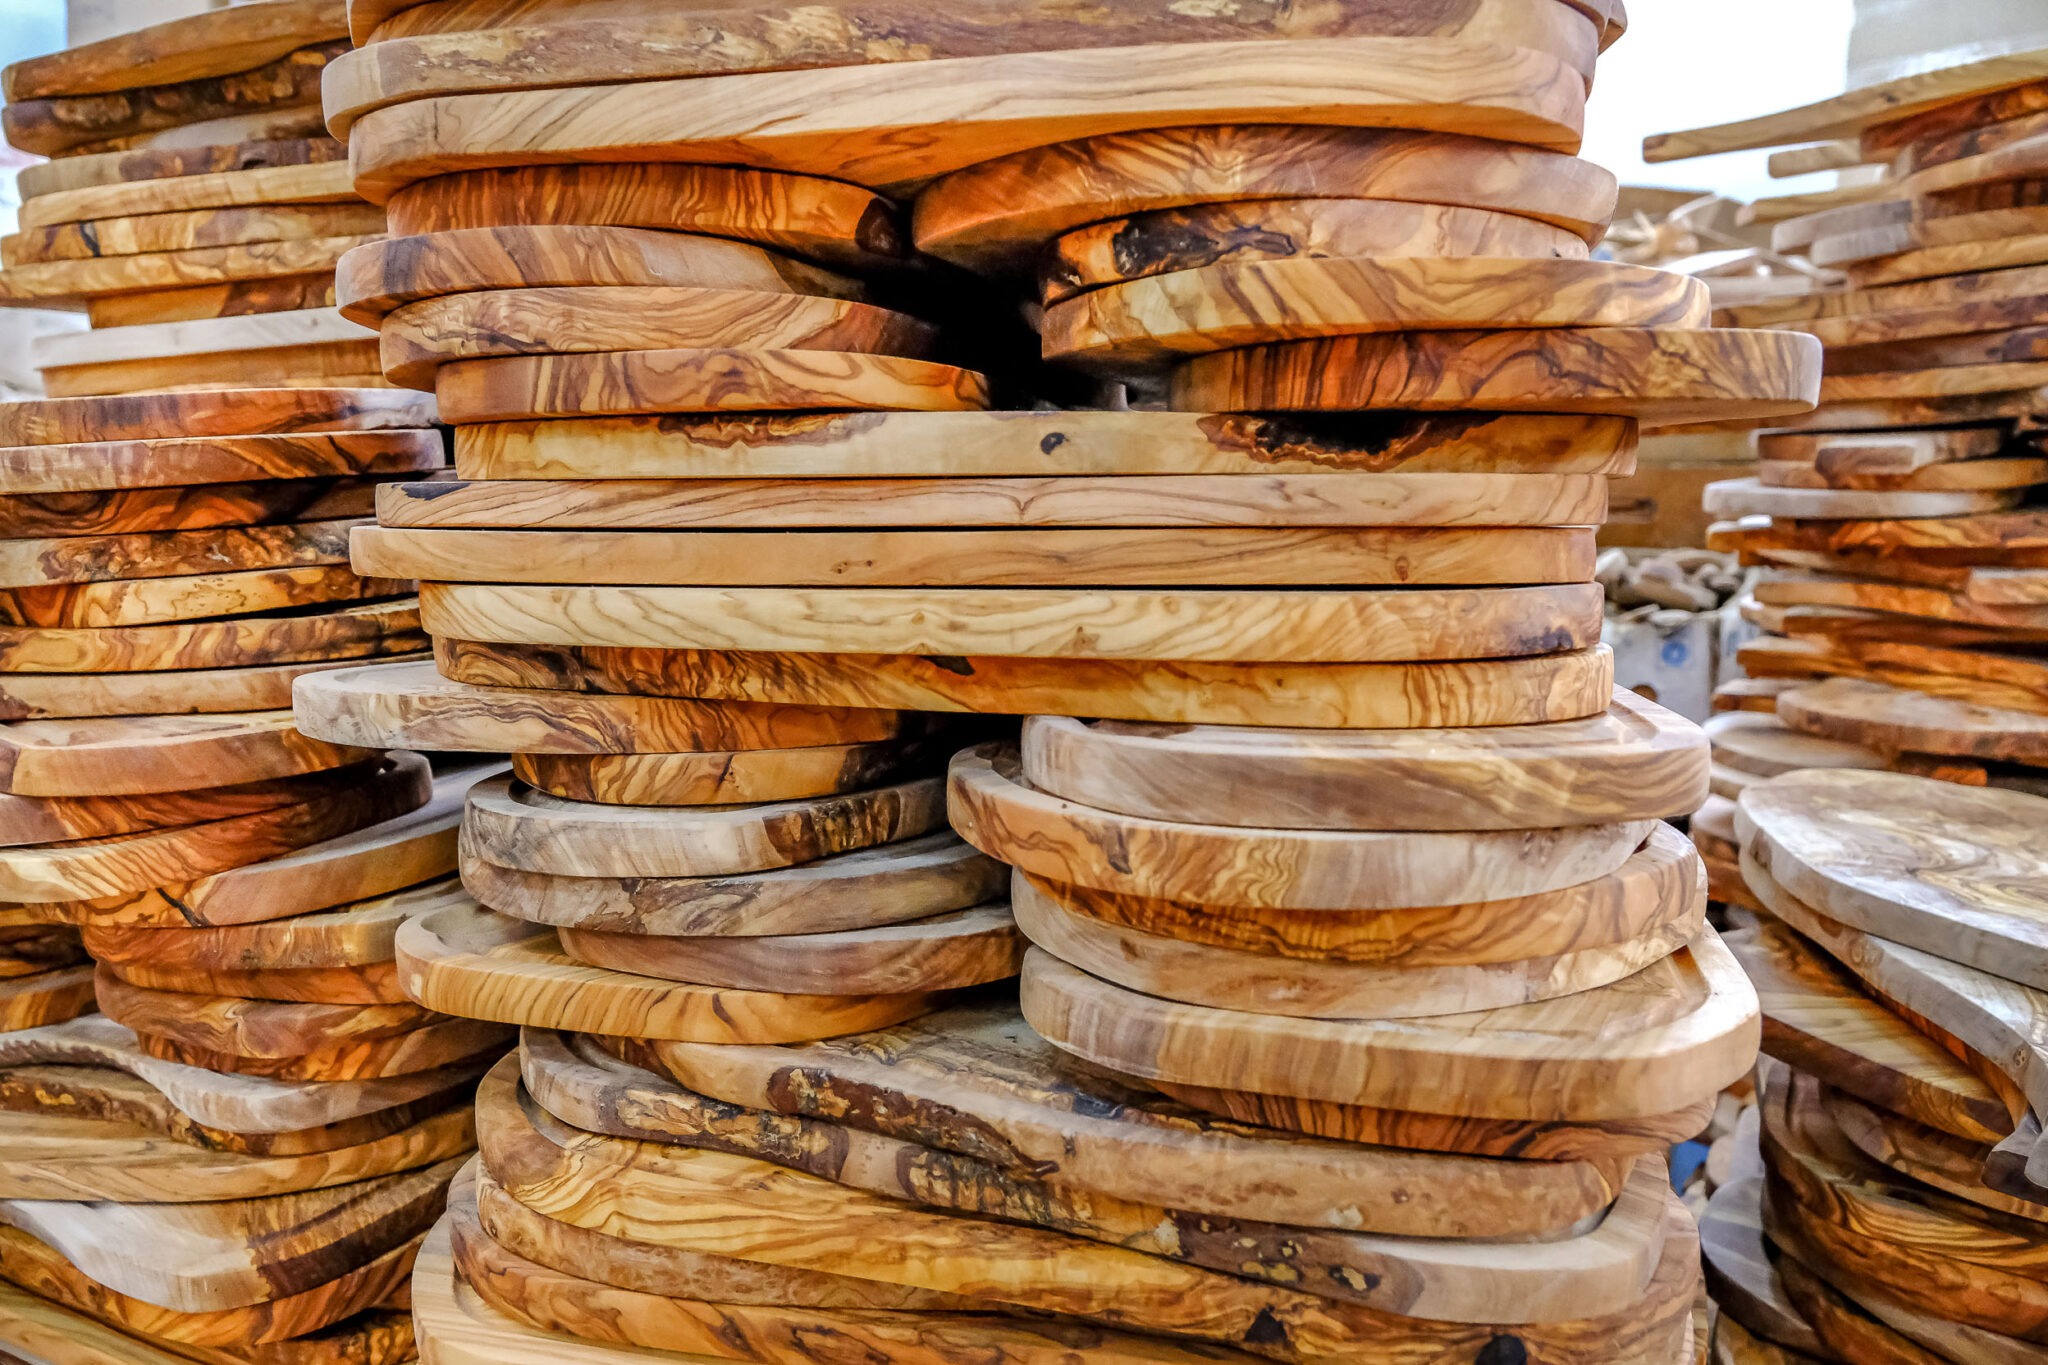 A stack of wooden cutting boards in a market.